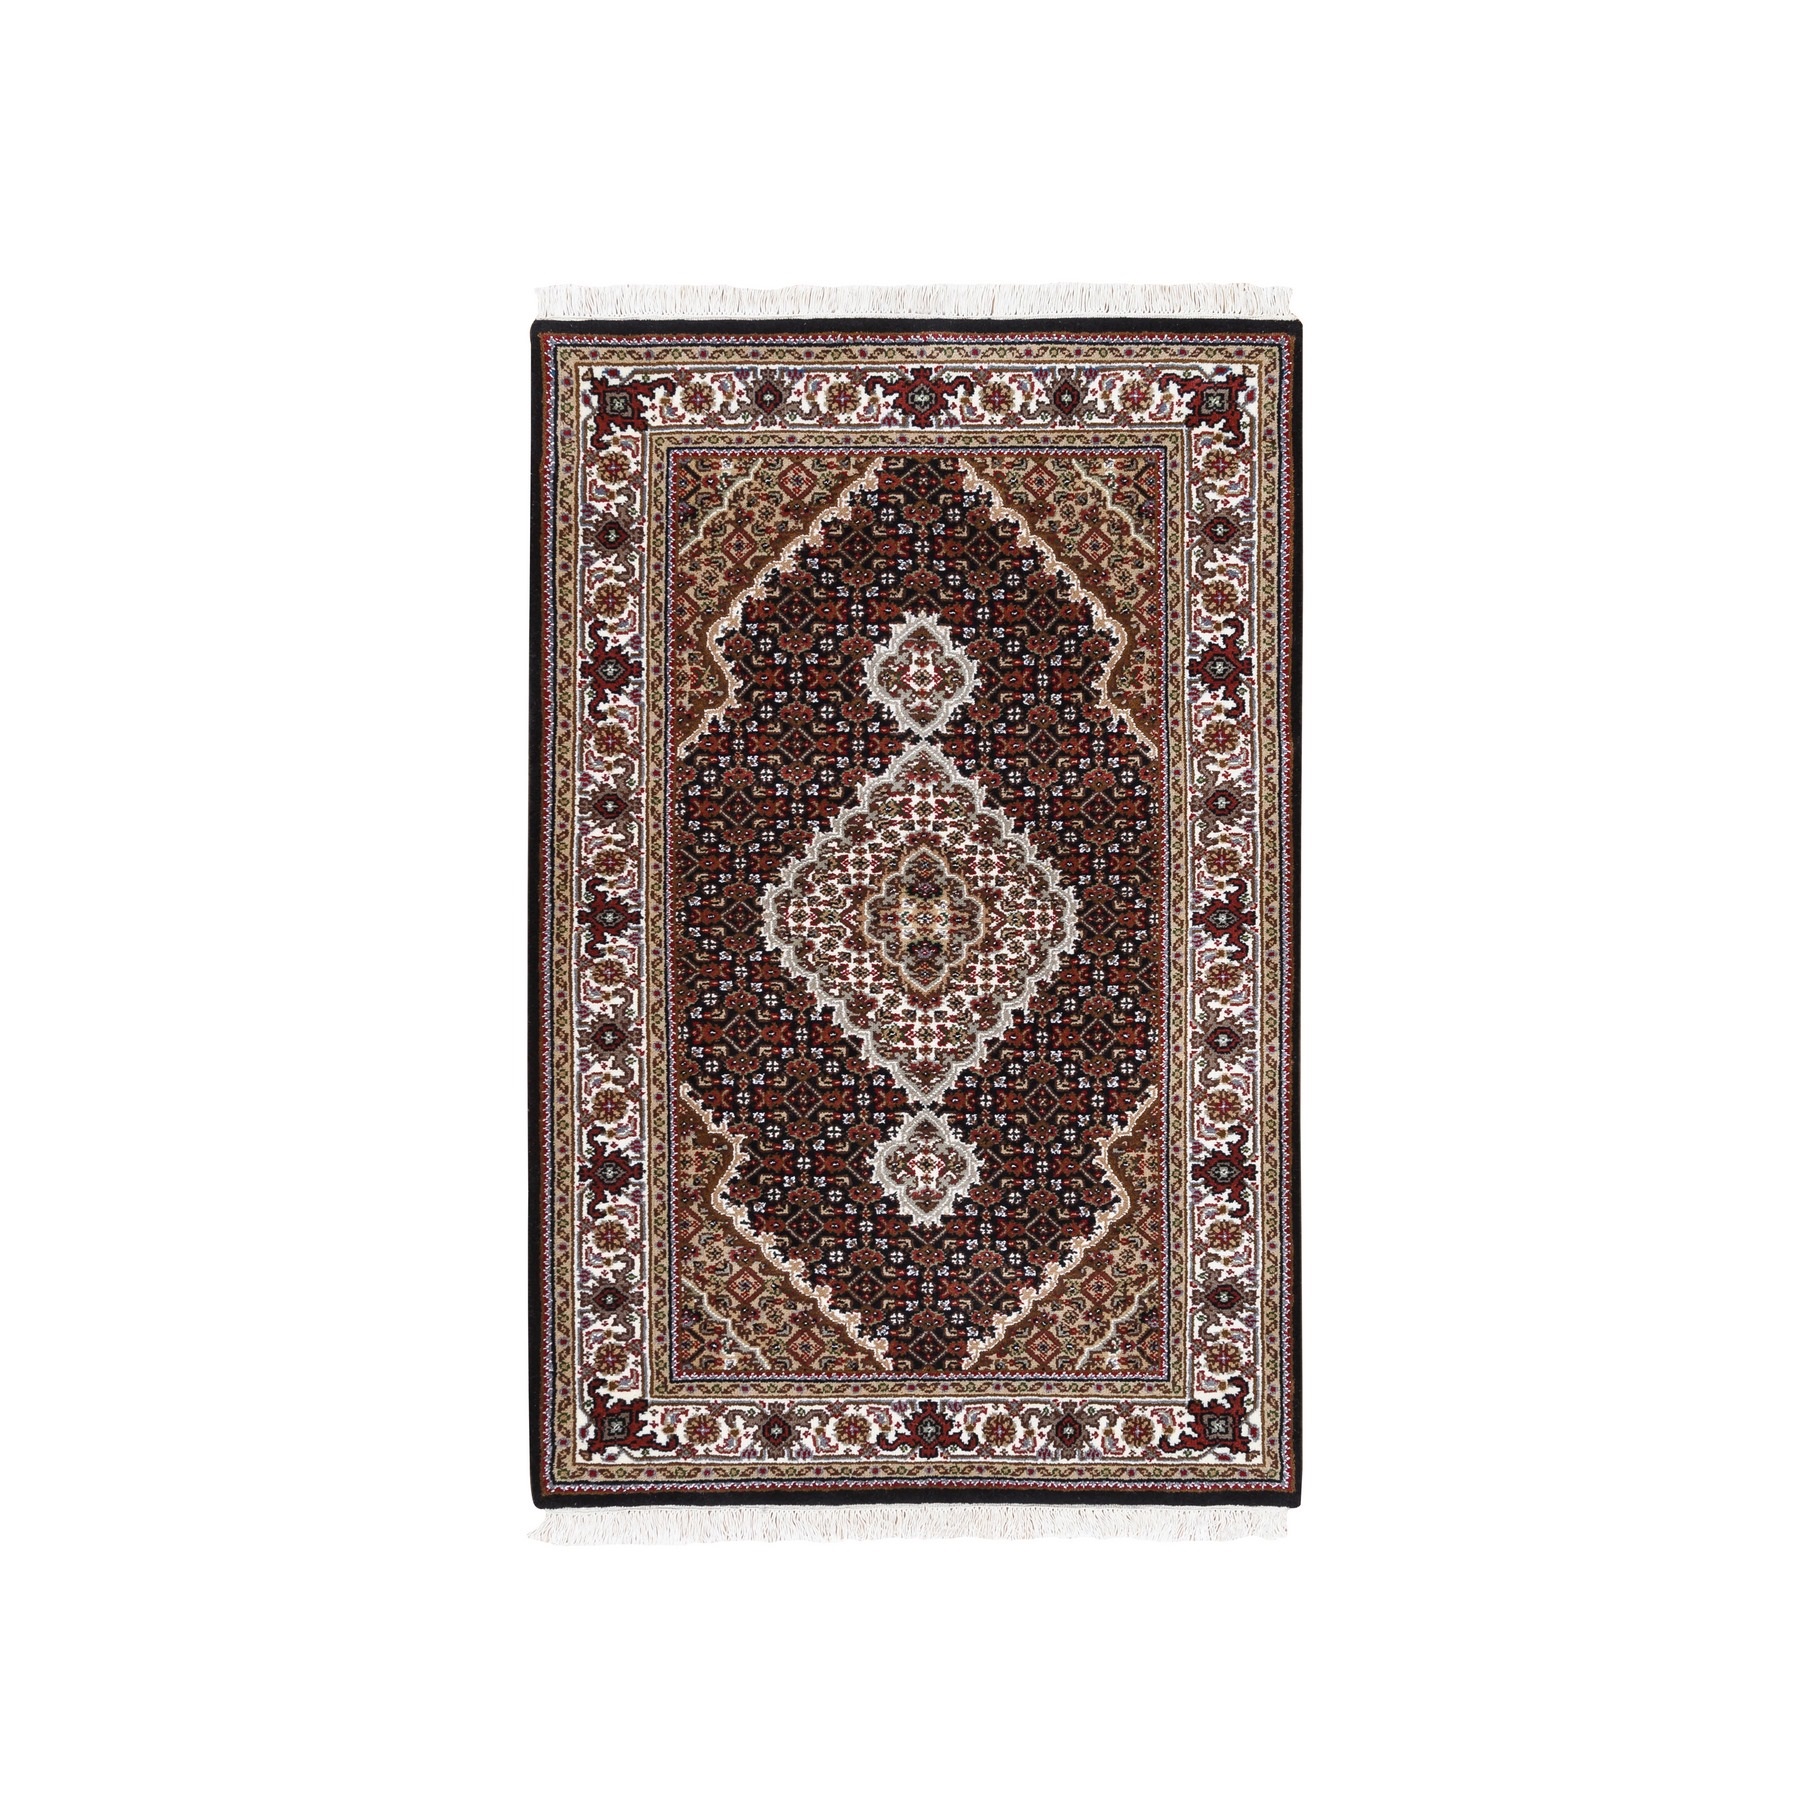 Pirniakan Collection Hand Knotted Black Rug No: 1124982